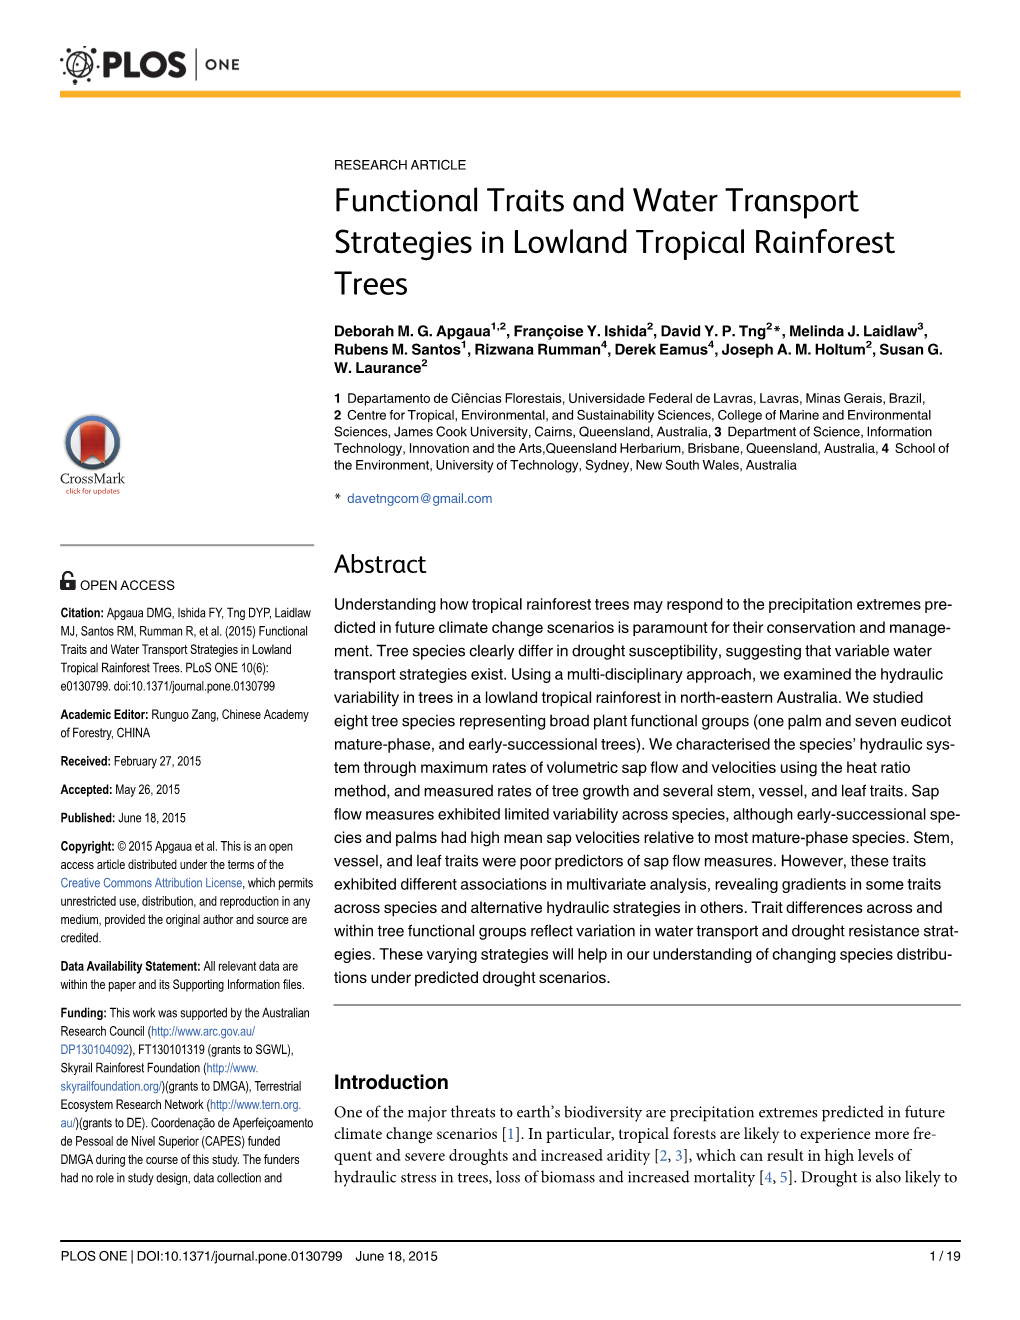 Functional Traits and Water Transport Strategies in Lowland Tropical Rainforest Trees